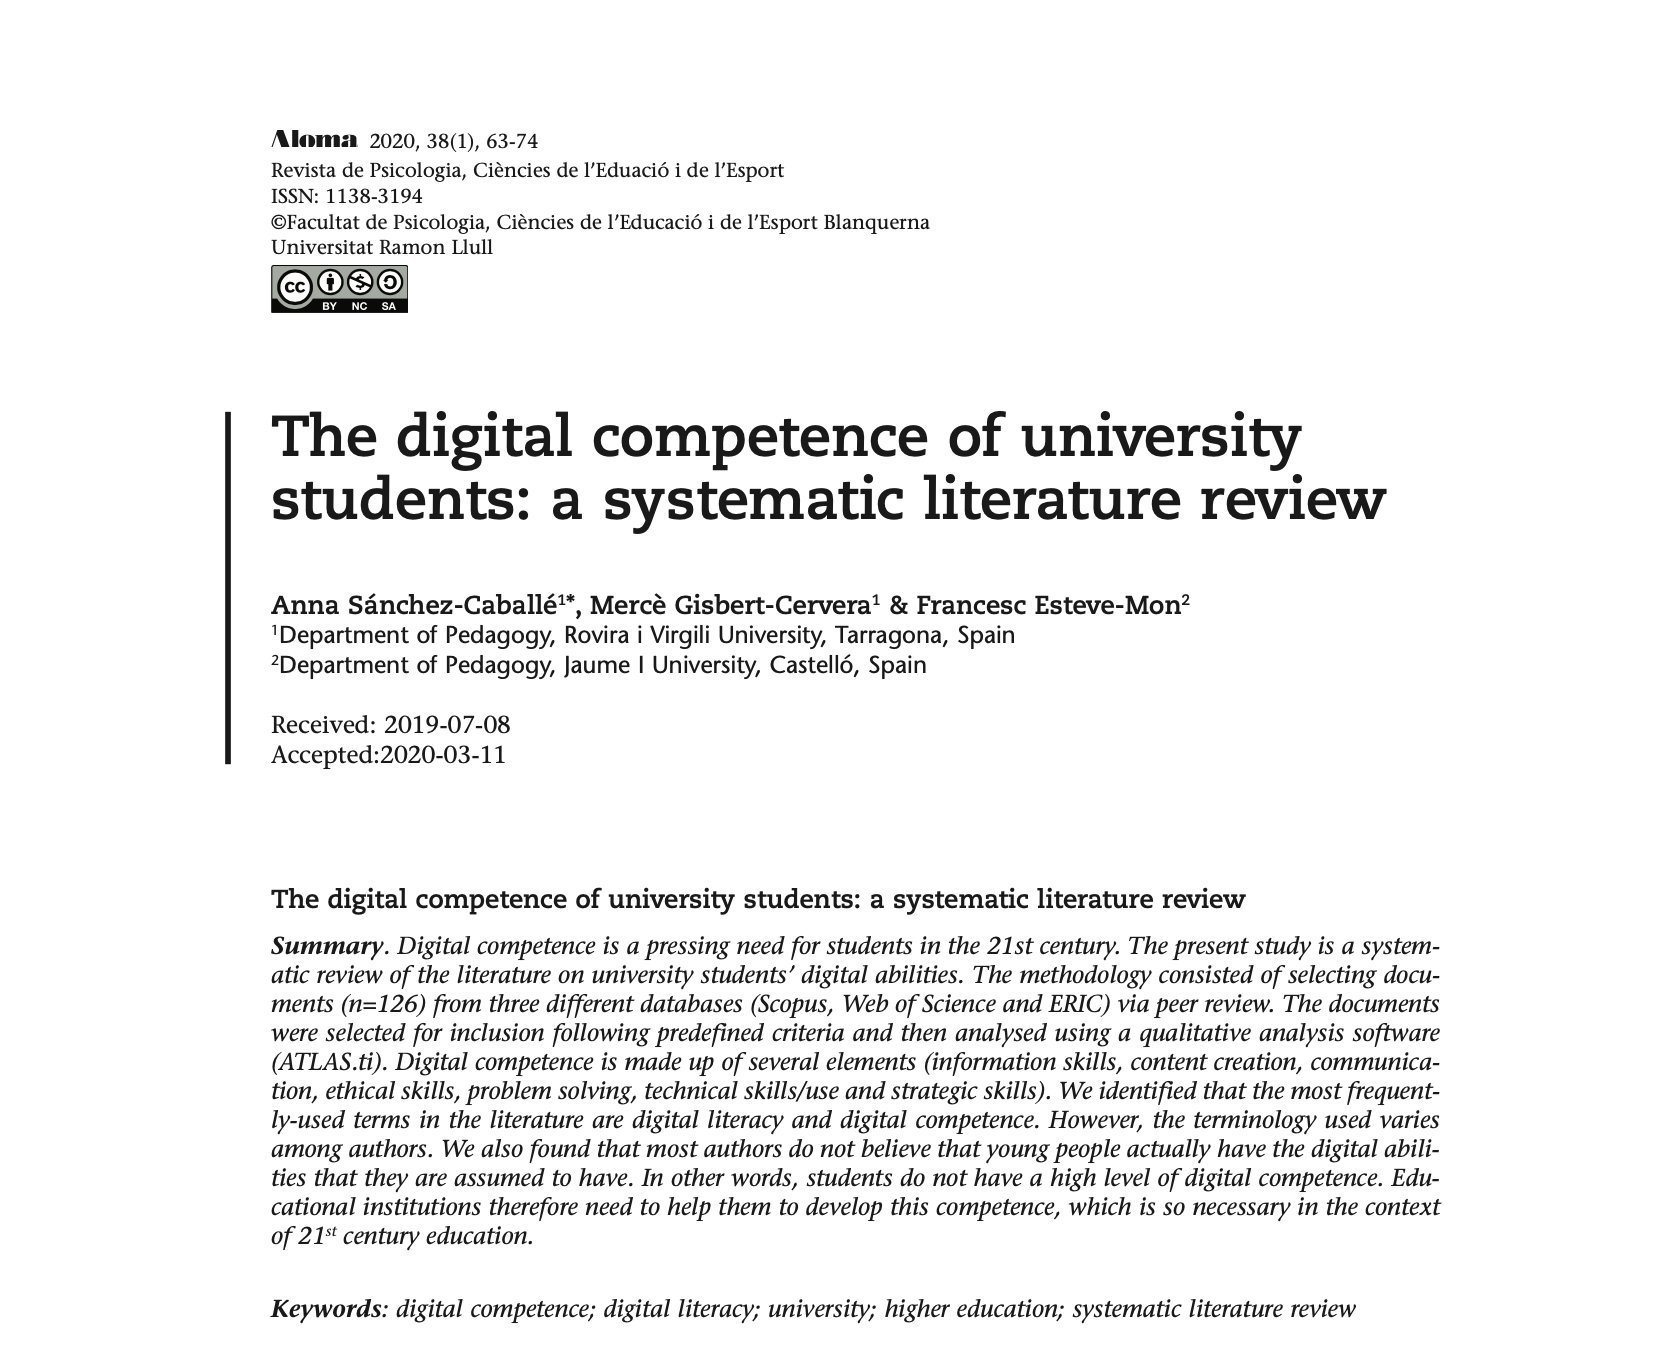 The digital competence of university students: a systematic literature review